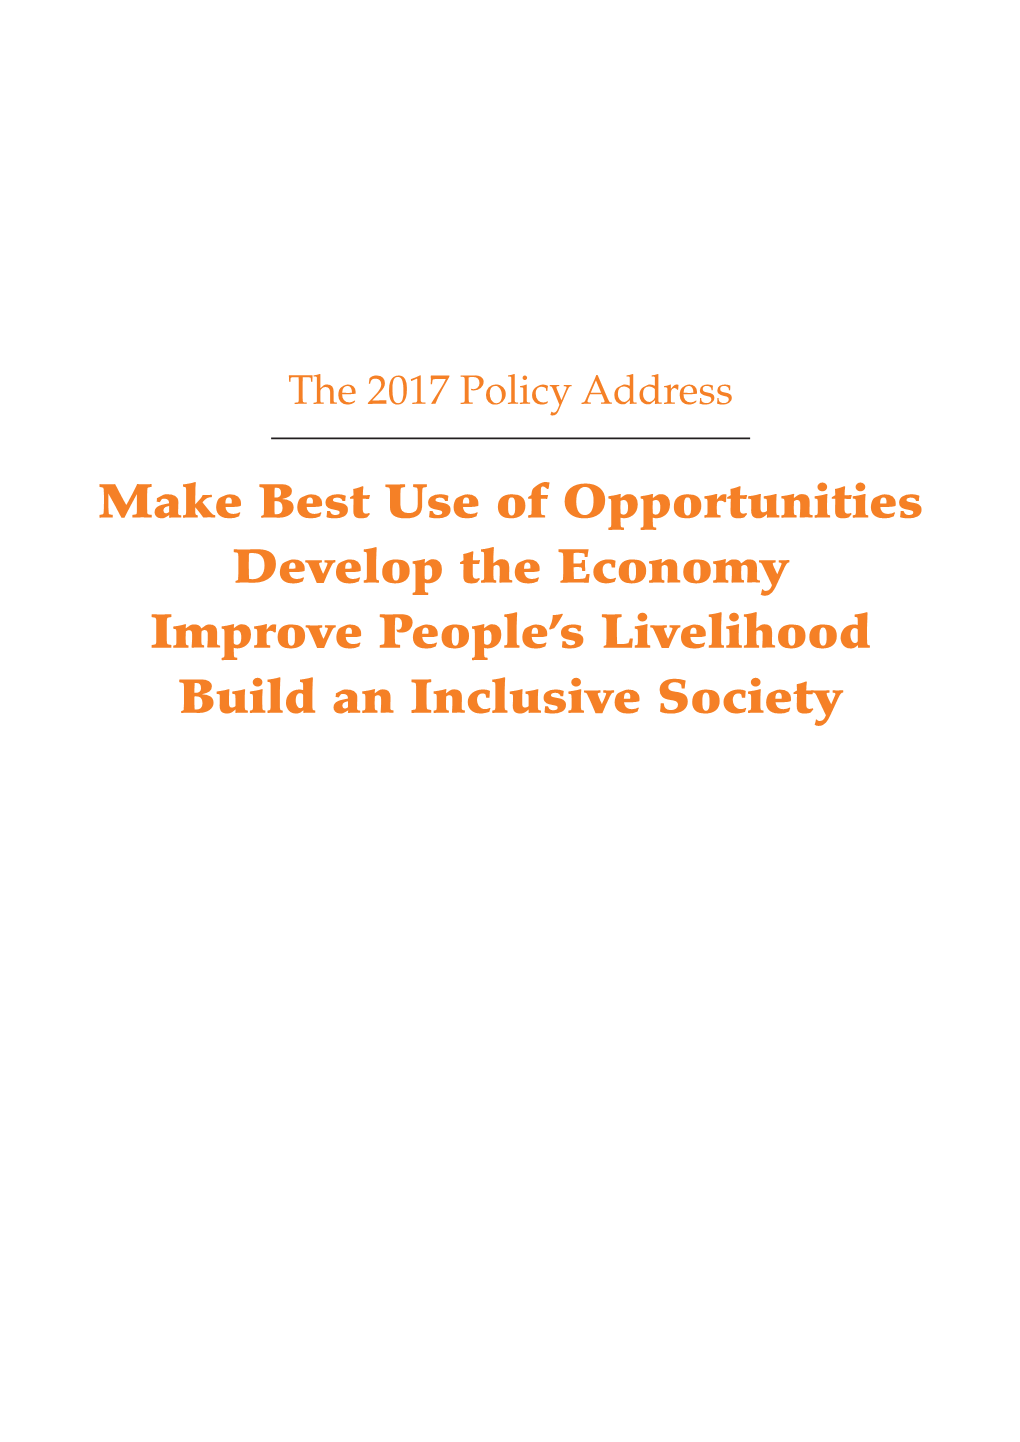 The 2017 Policy Address